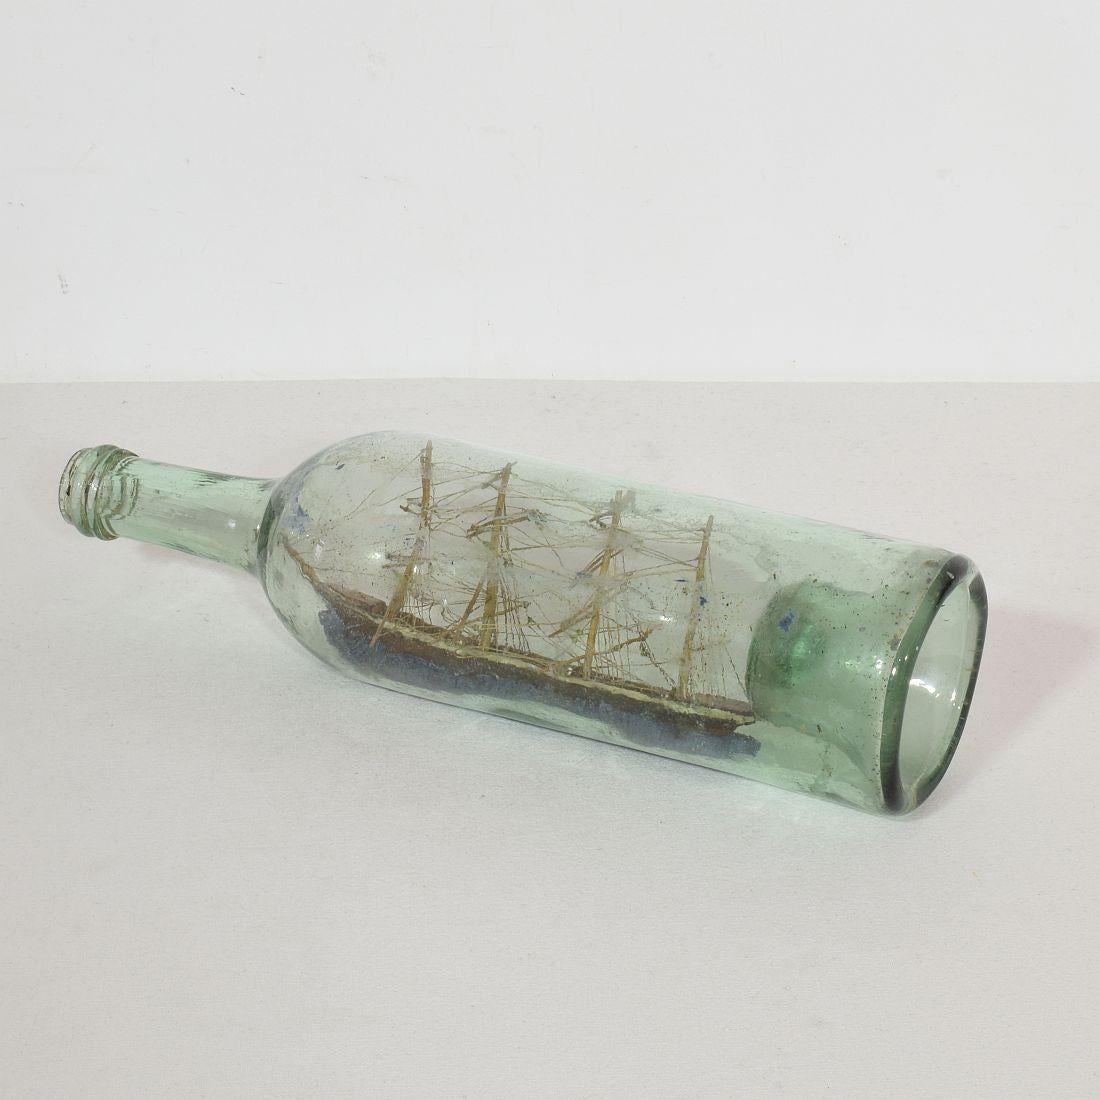 Hand-Crafted French, 19th Century, Model Ship in a Glass Bottle